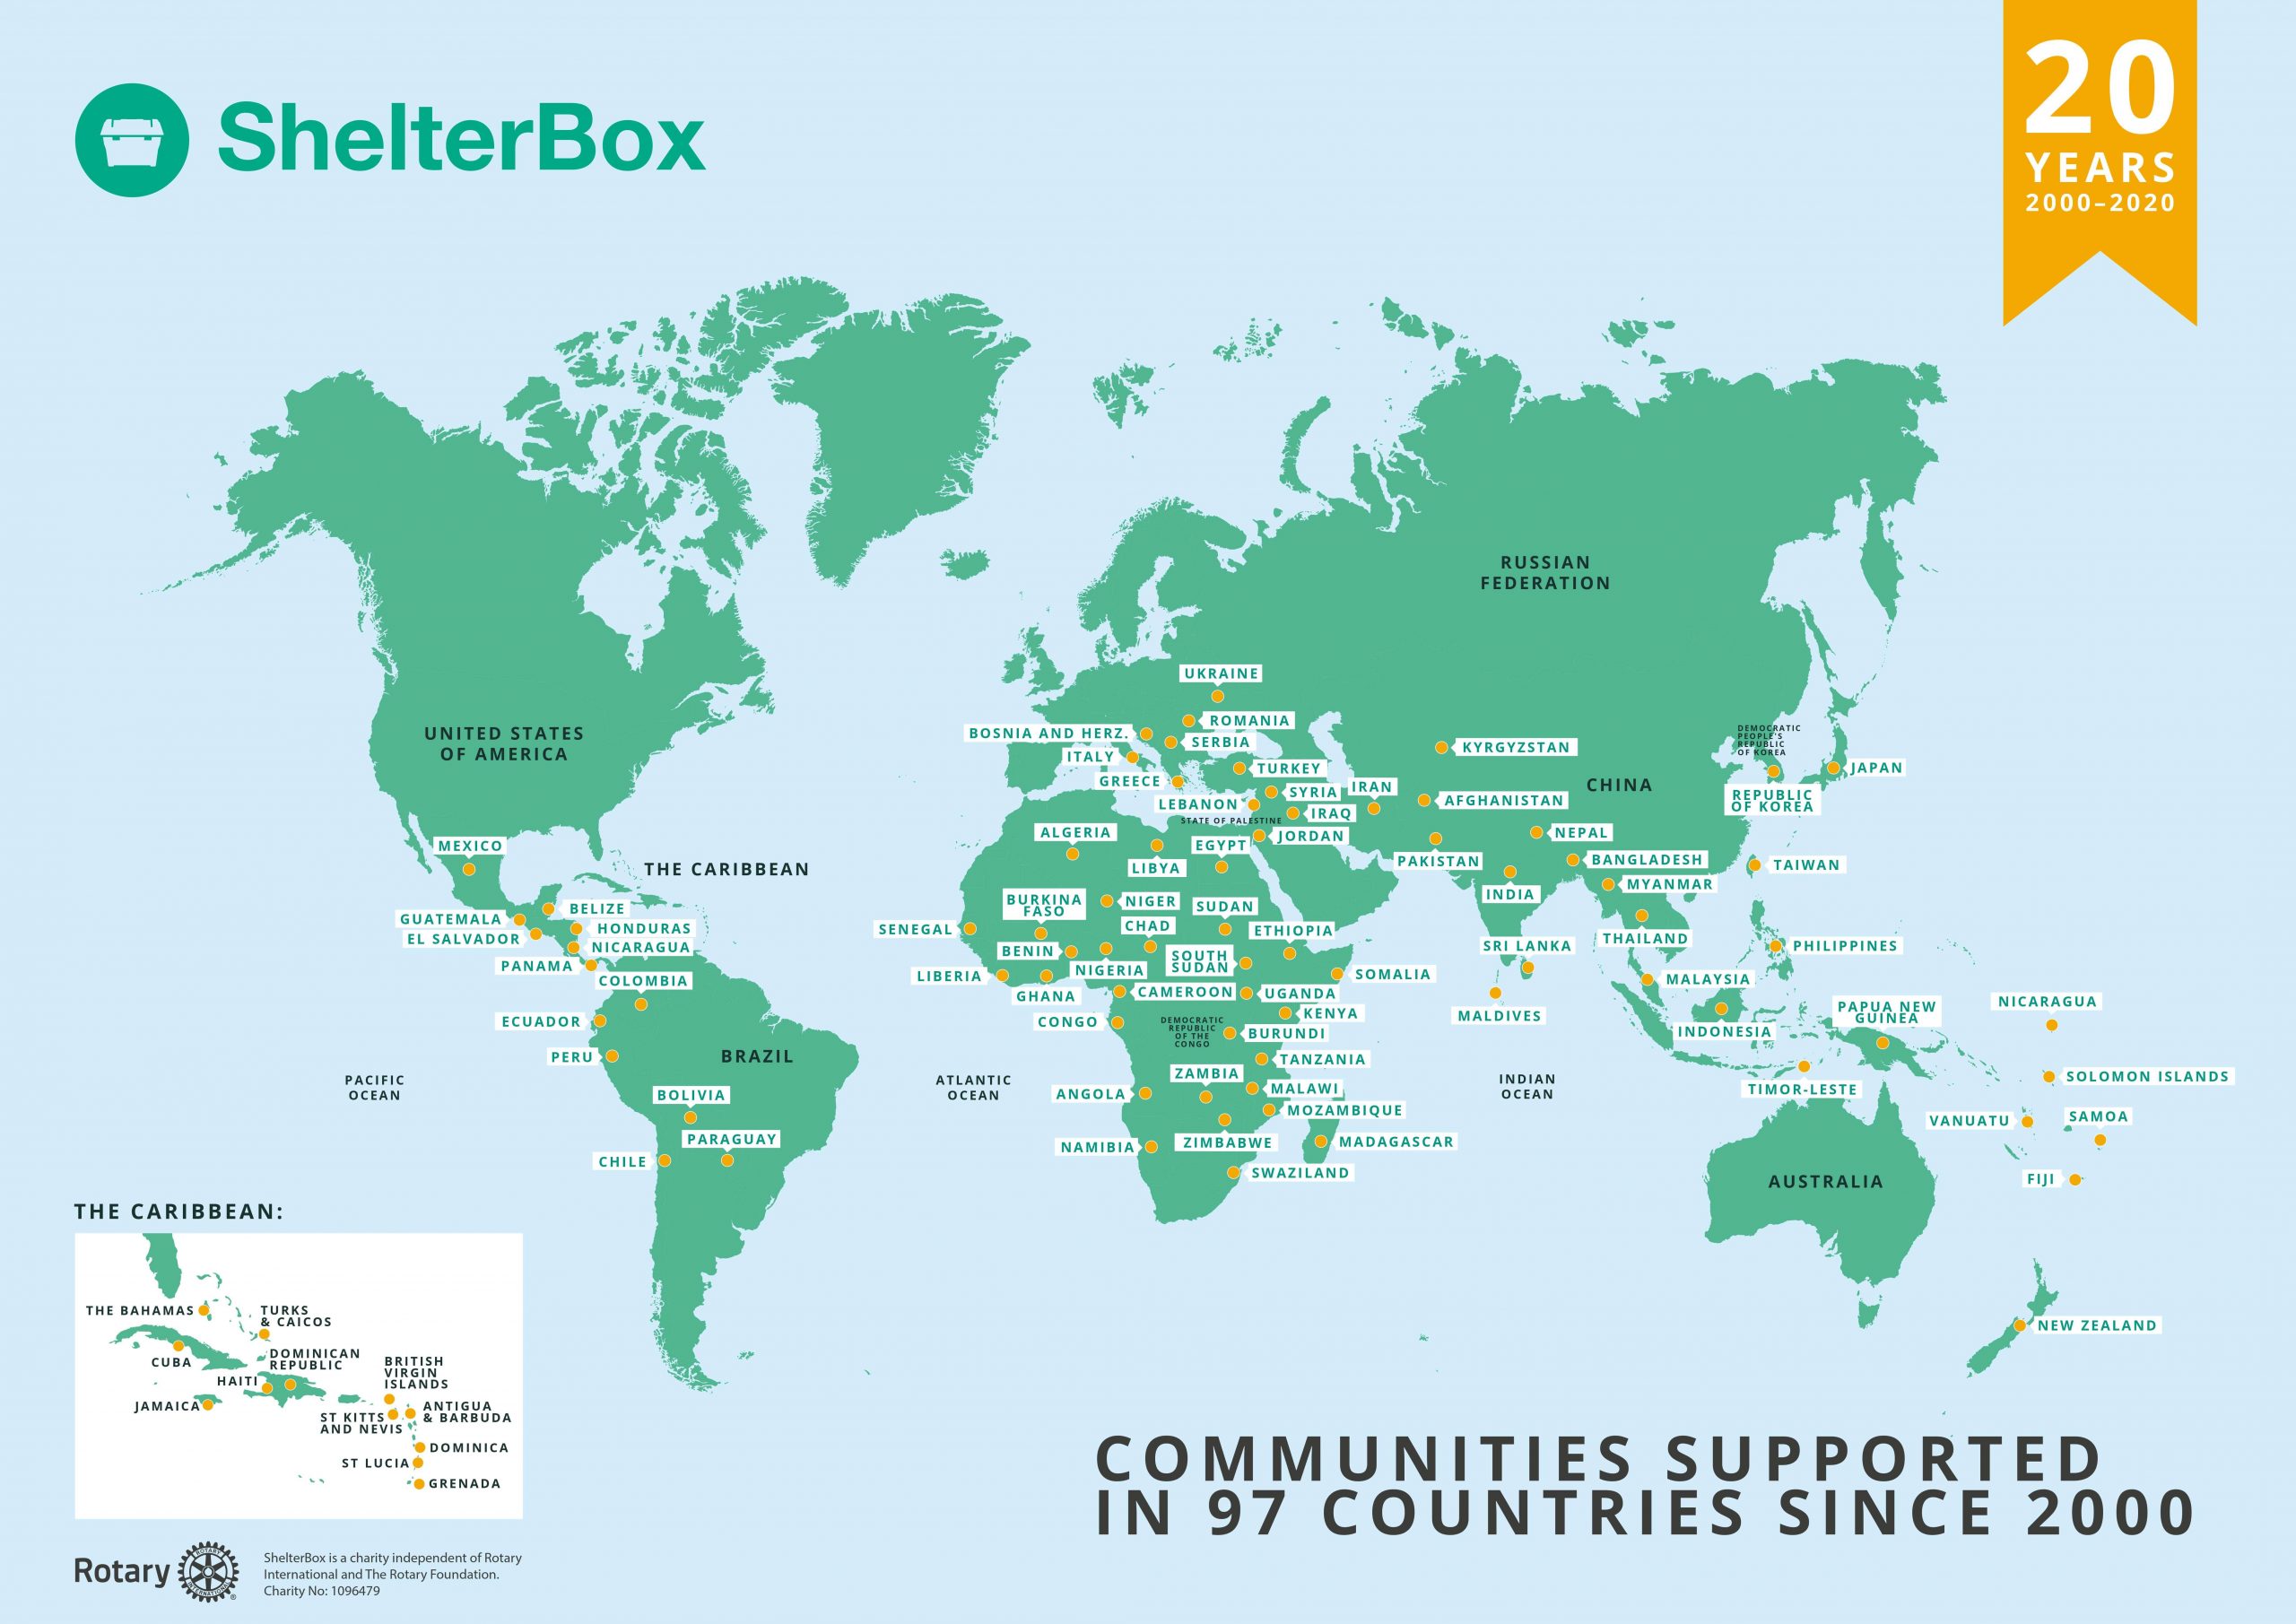 map of the world showing where ShelterBox has worked since 2000 up to 2020